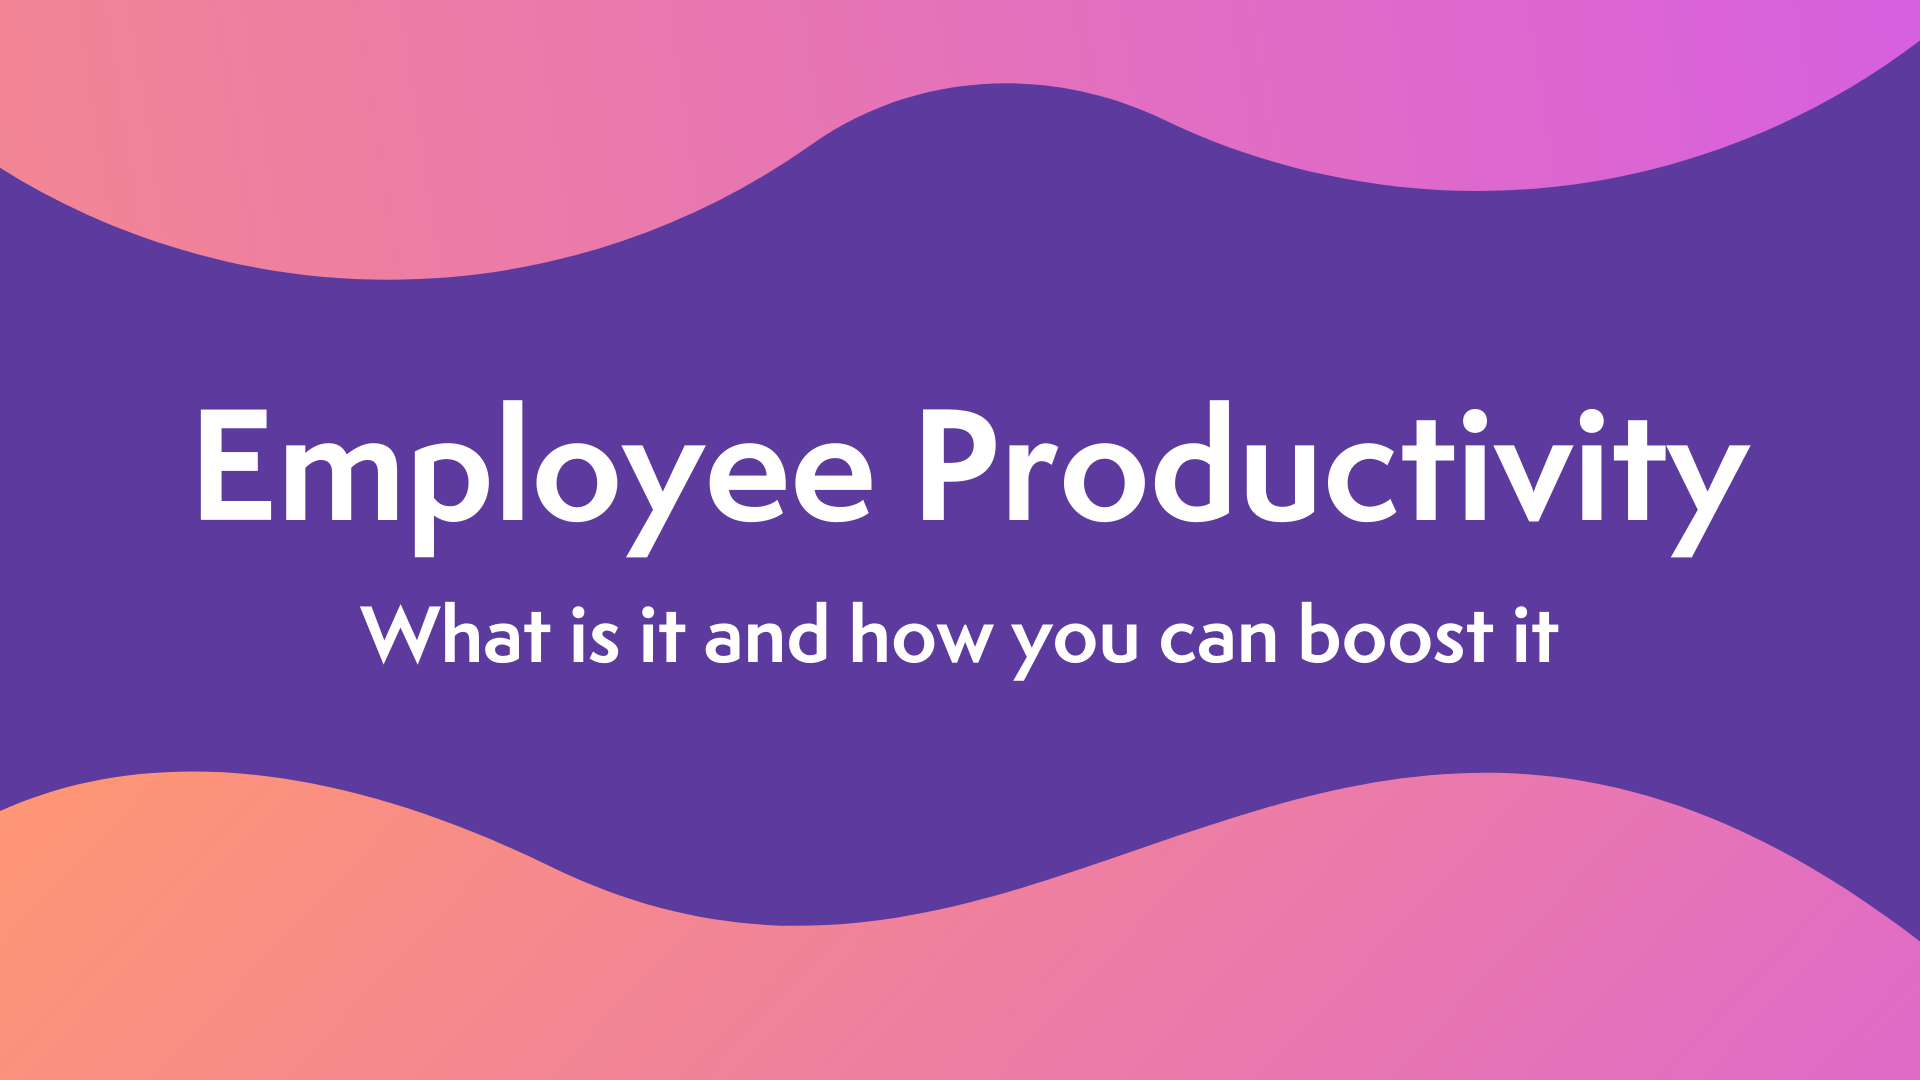 What is Employee Productivity and How Can You Boost It?